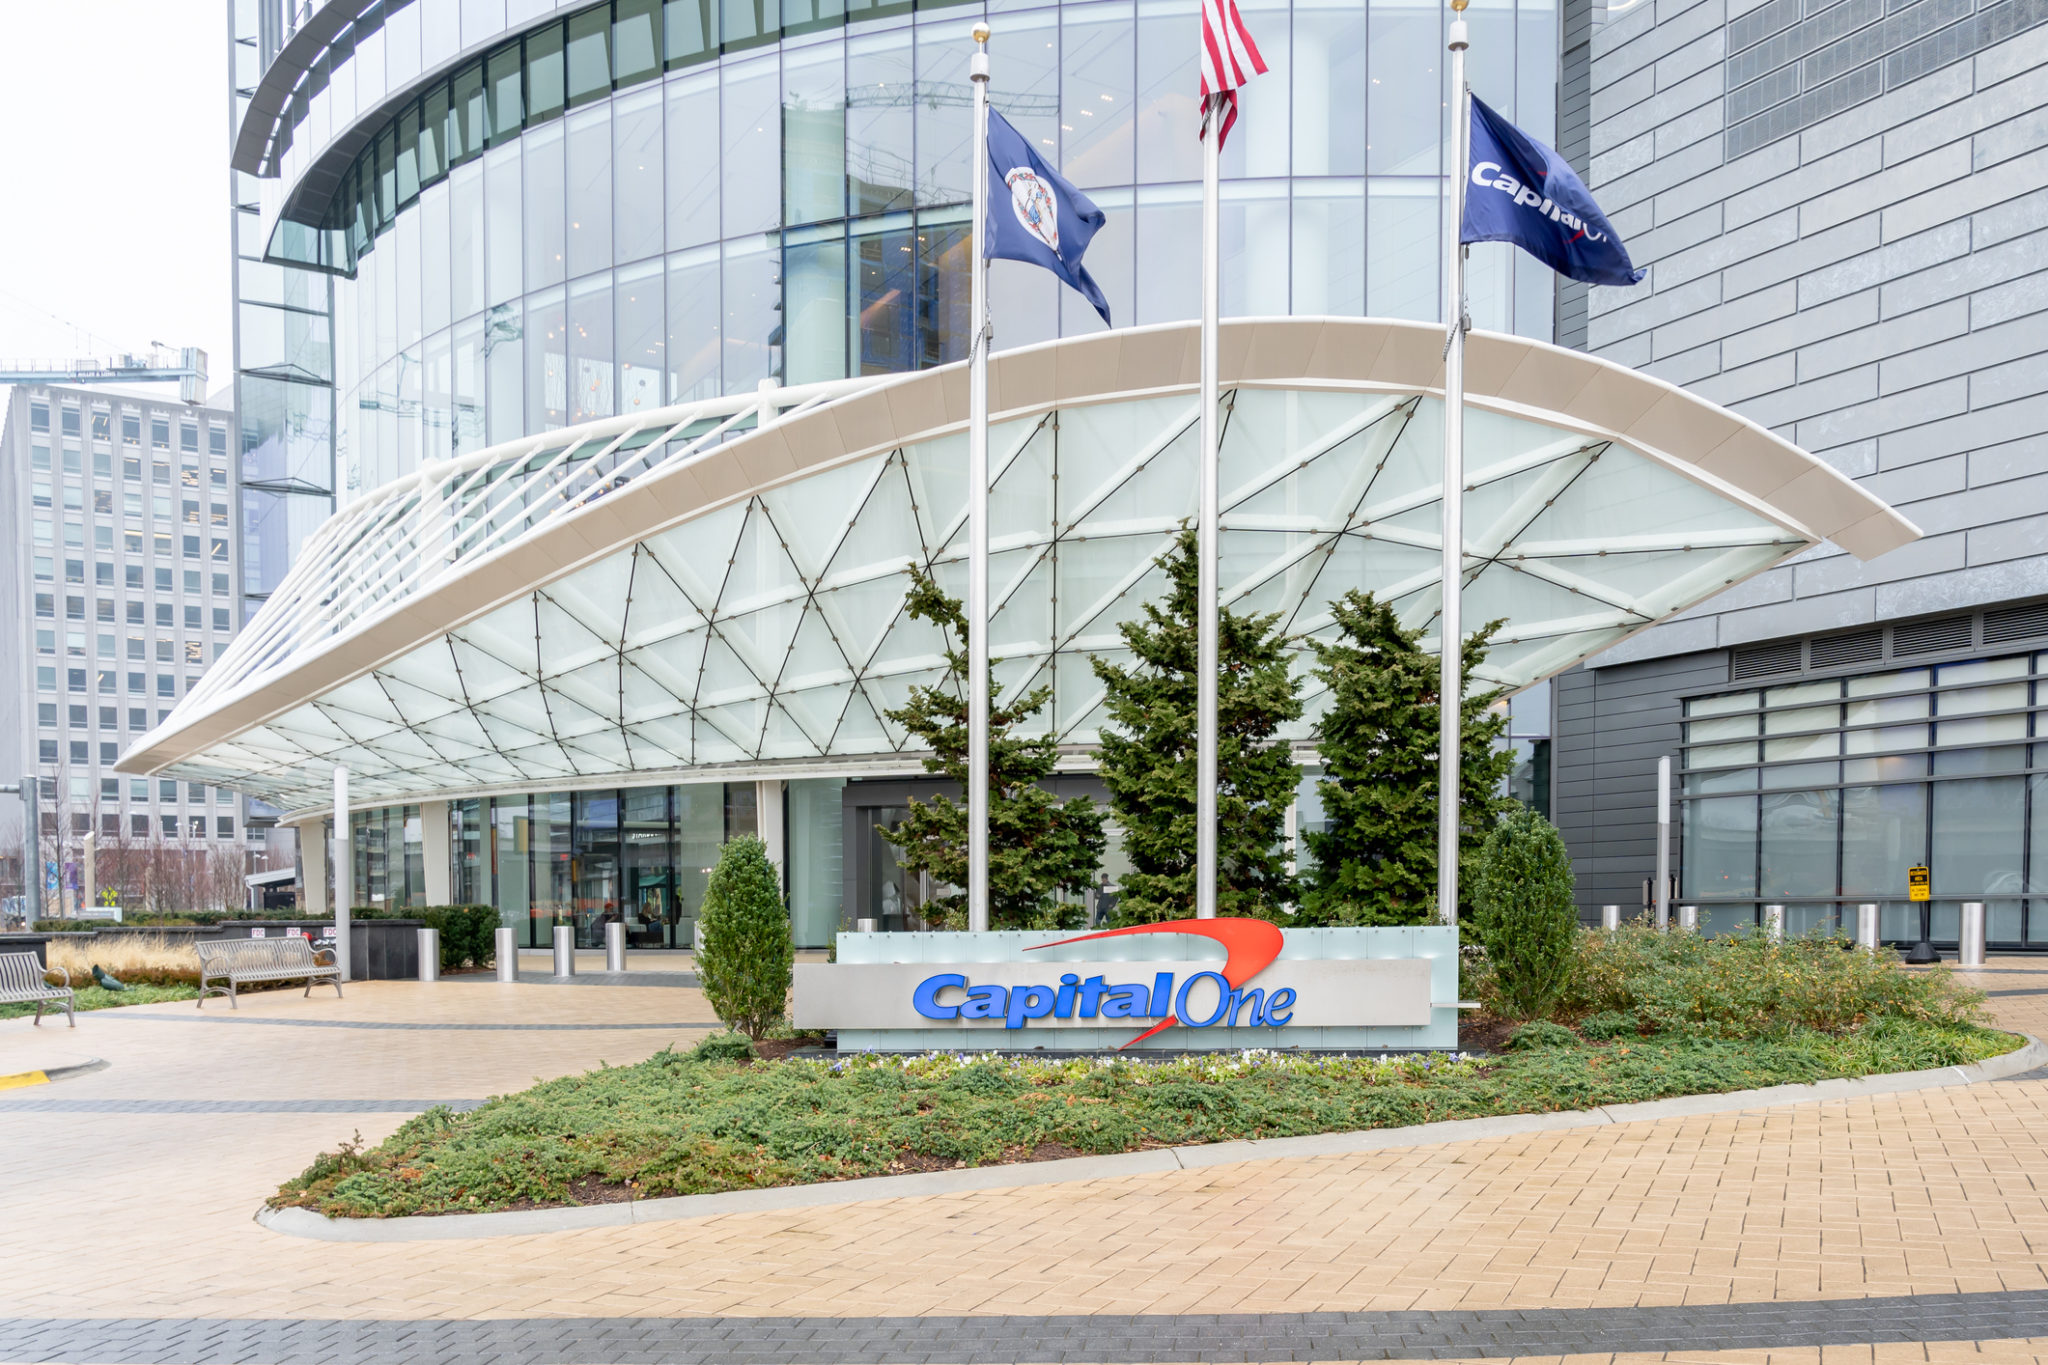 Capital one Headquarters building. Capital One Financial Corporation is